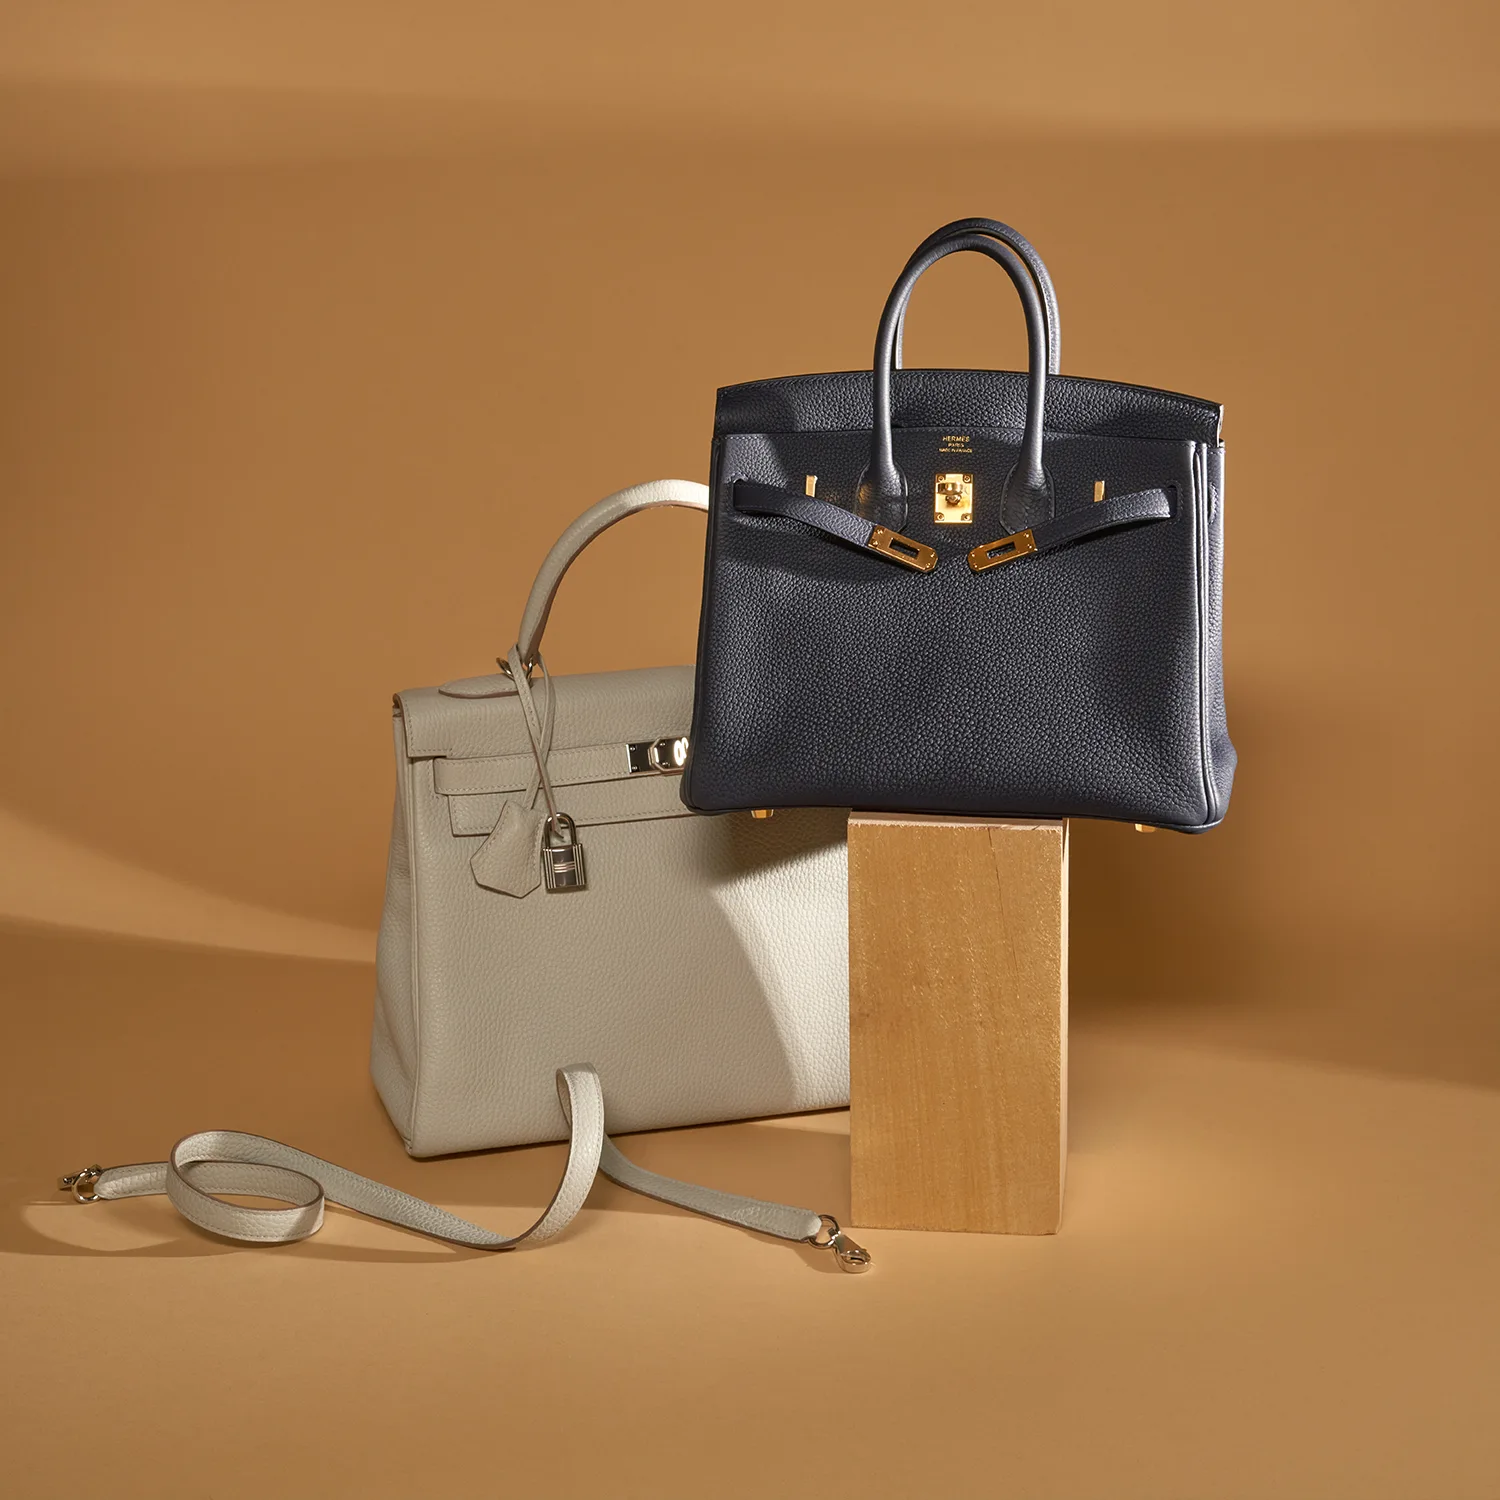 Minimalist Bags: When Less is Truly More | SACLÀB